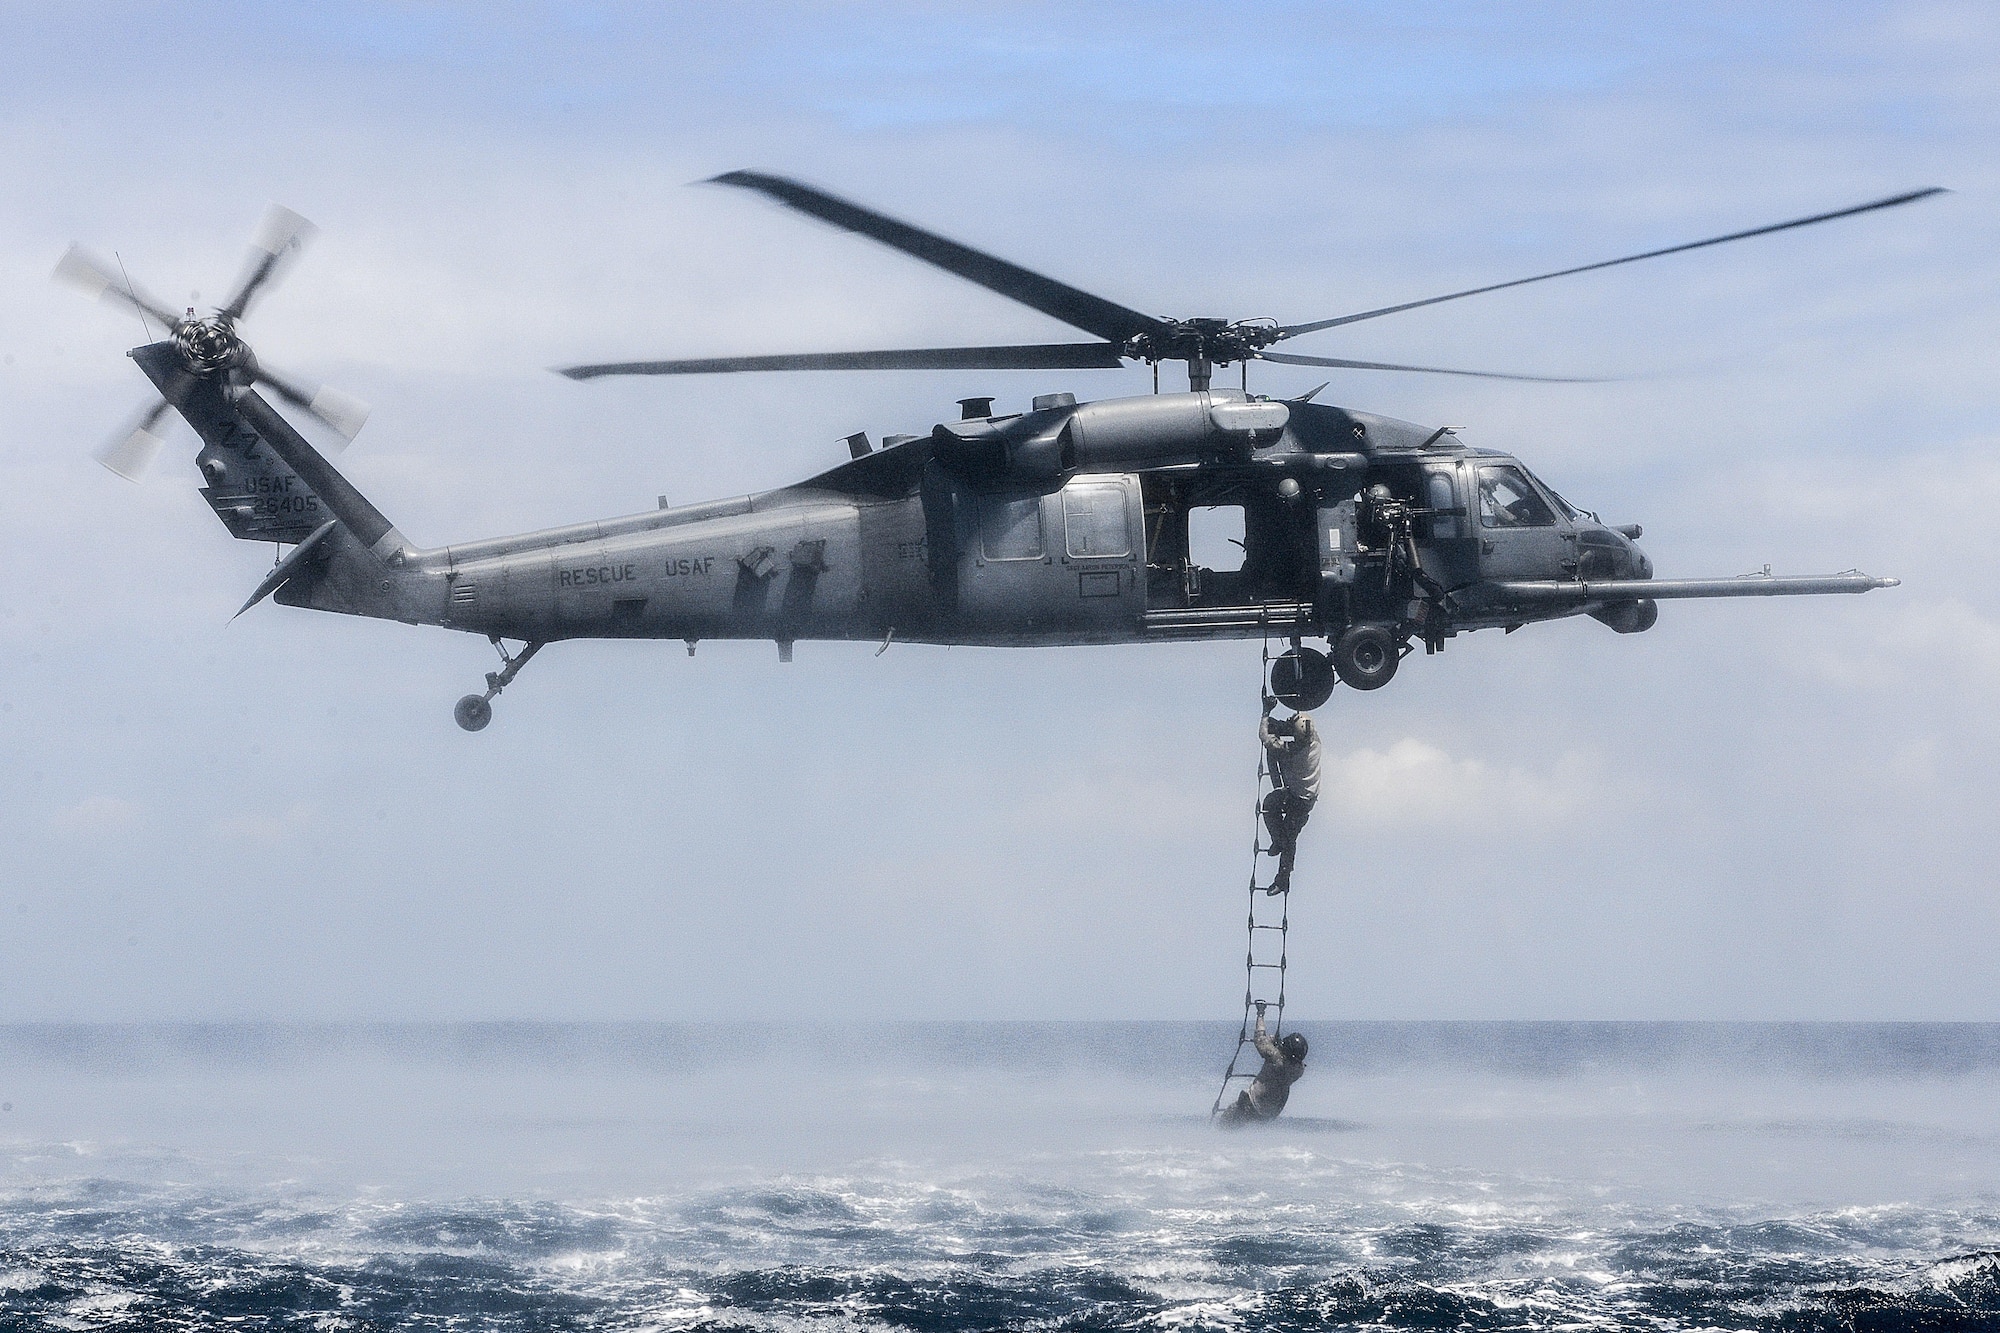 An HH-60G Pave Hawk from the 33rd Rescue Squadron at Kadena Air Base, Japan, performs a rope-ladder recovery with Airmen from the 320th Special Tactics Squadron during an amphibious operations exercise Sept. 22, 2015, off the west coast of Okinawa, Japan. Special tactics Airmen are organized, trained and equipped to conduct high-risk combat operations. (U.S. Air Force photo/Senior Airman John Linzmeier)